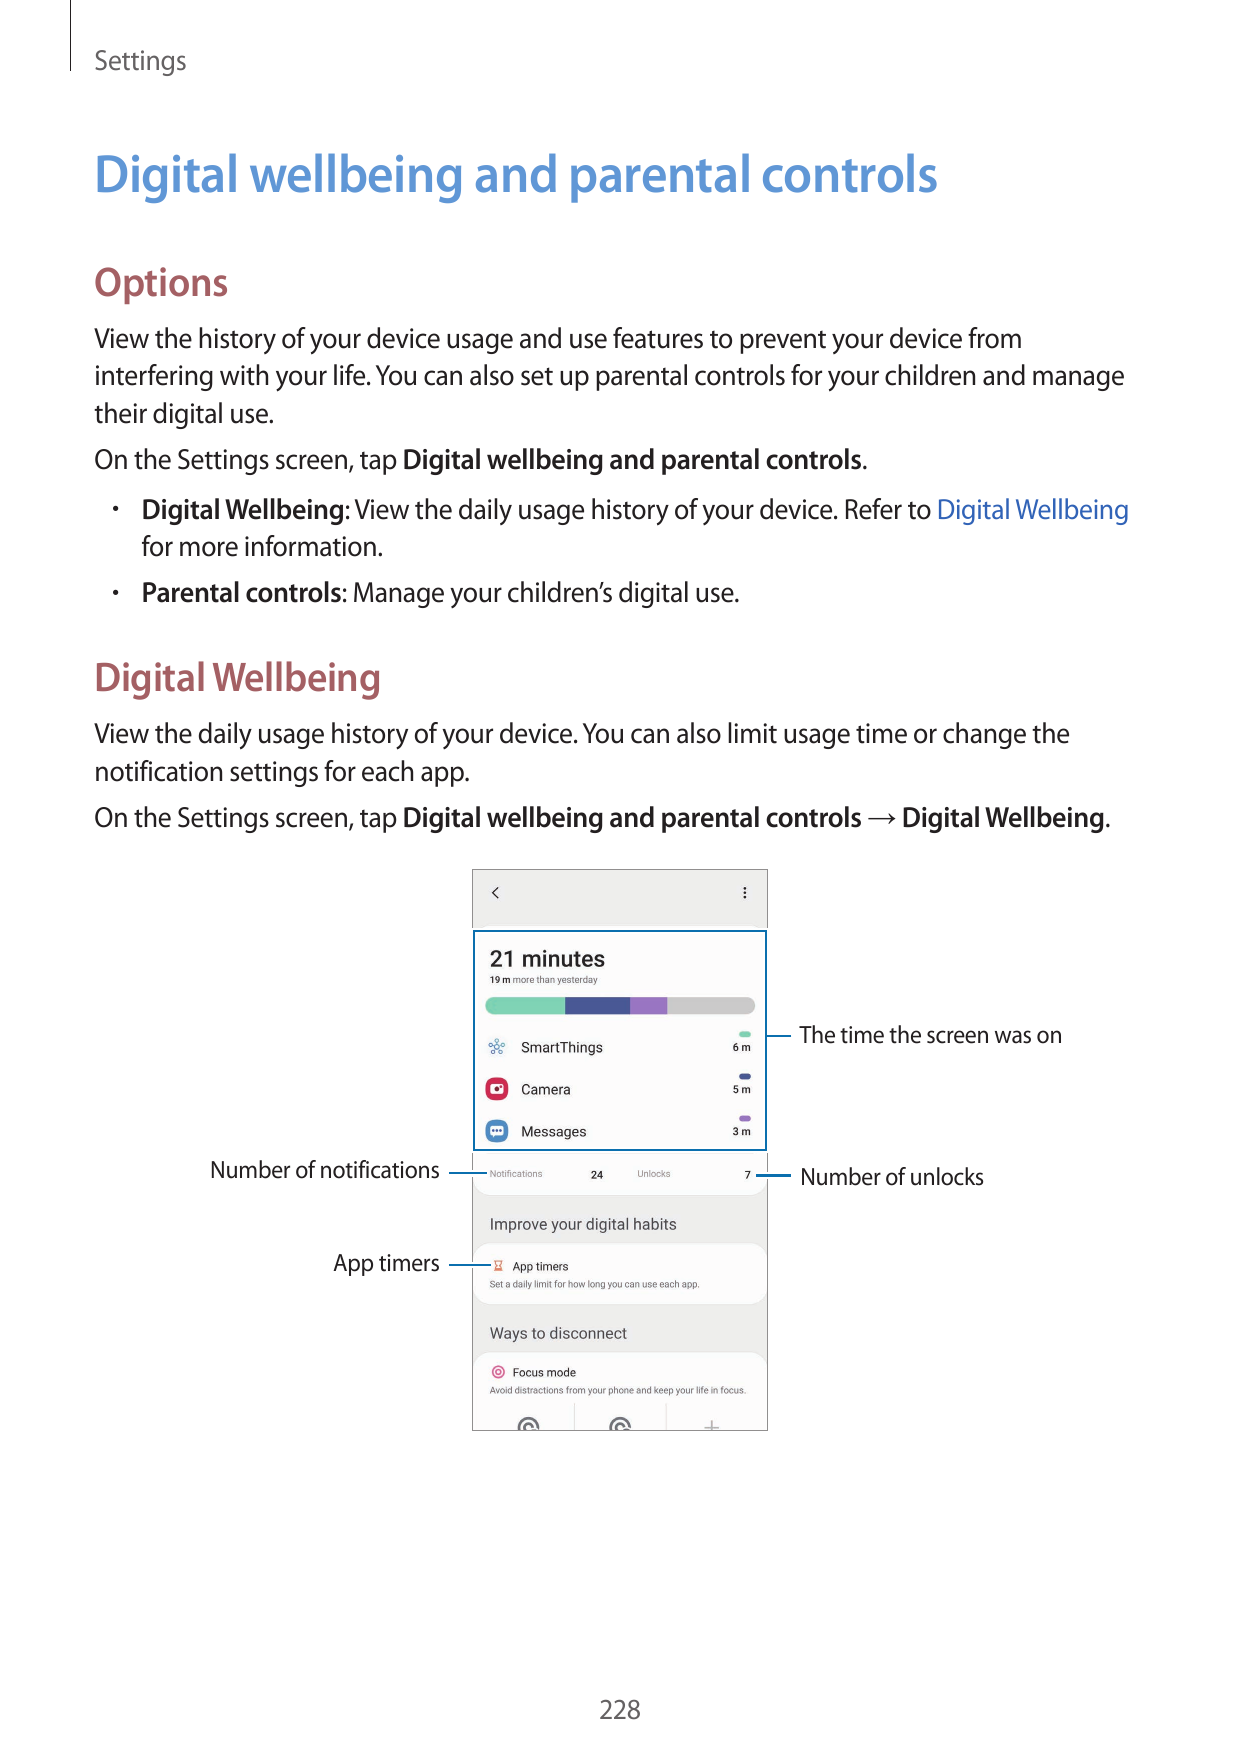 SettingsDigital wellbeing and parental controlsOptionsView the history of your device usage and use features to prevent your dev